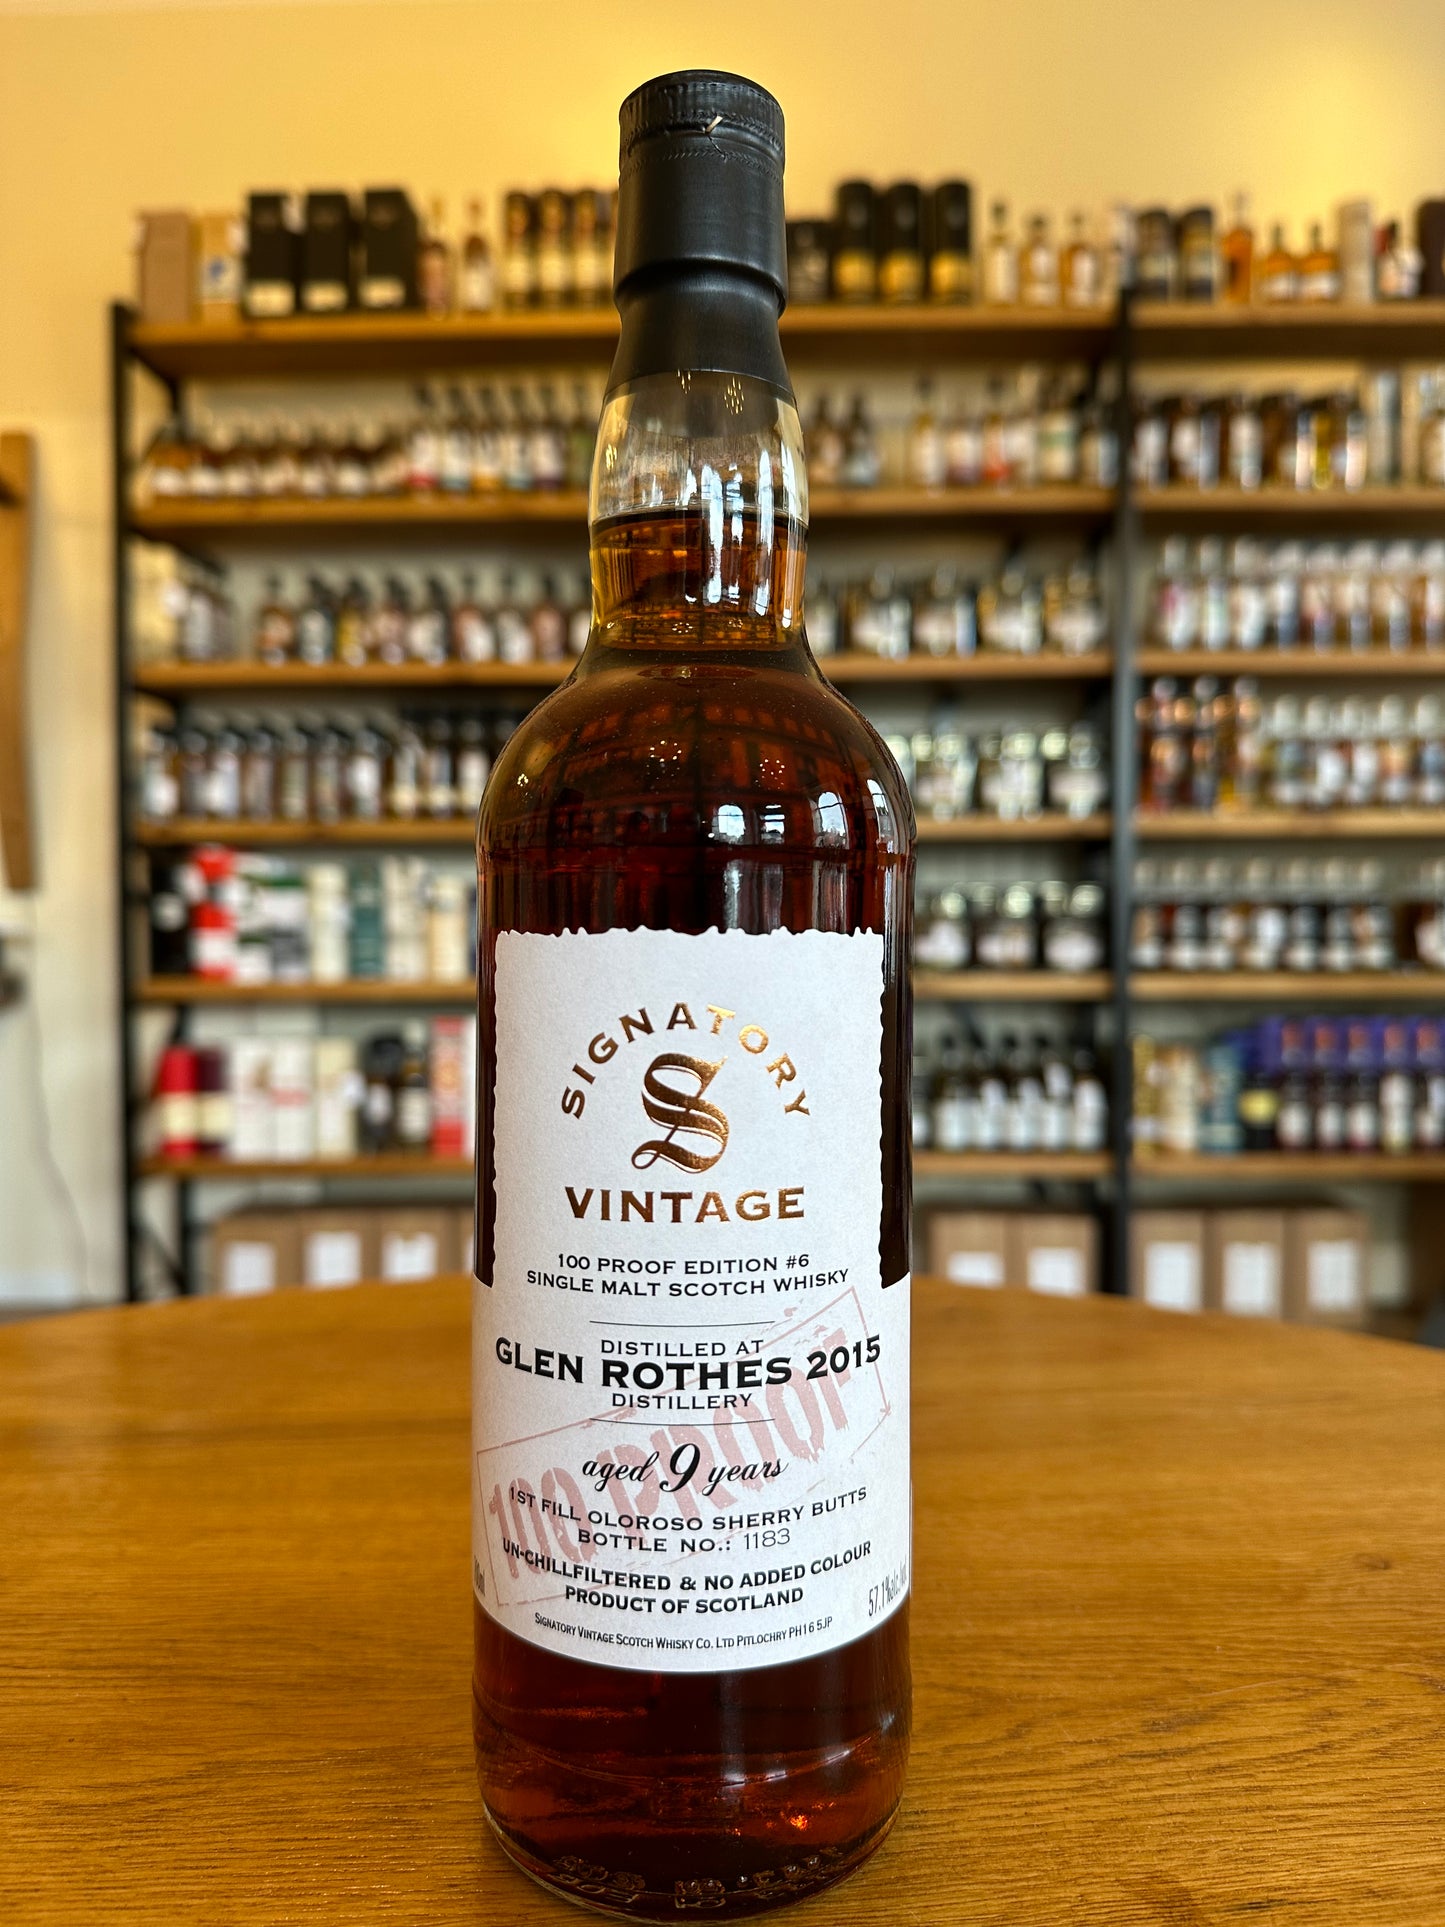 Signatory - Glen Rothes 2015 - Aged 9 Years - 100 Proof Series